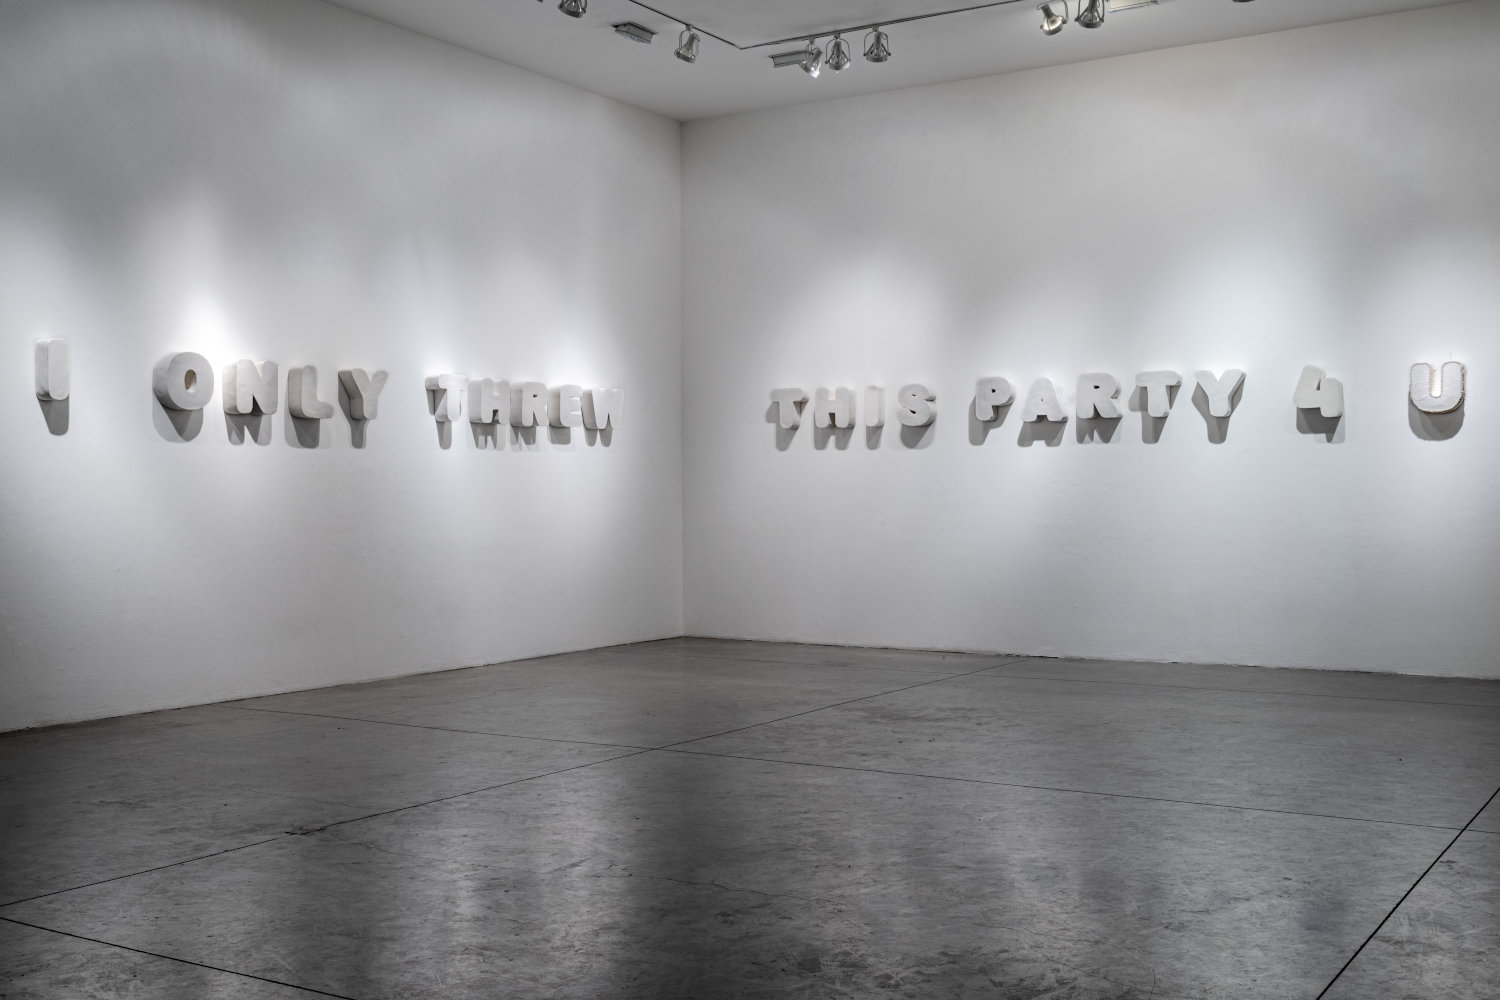 Sayer Delk artwork of letters on a wall saying "I only threw this party for you"